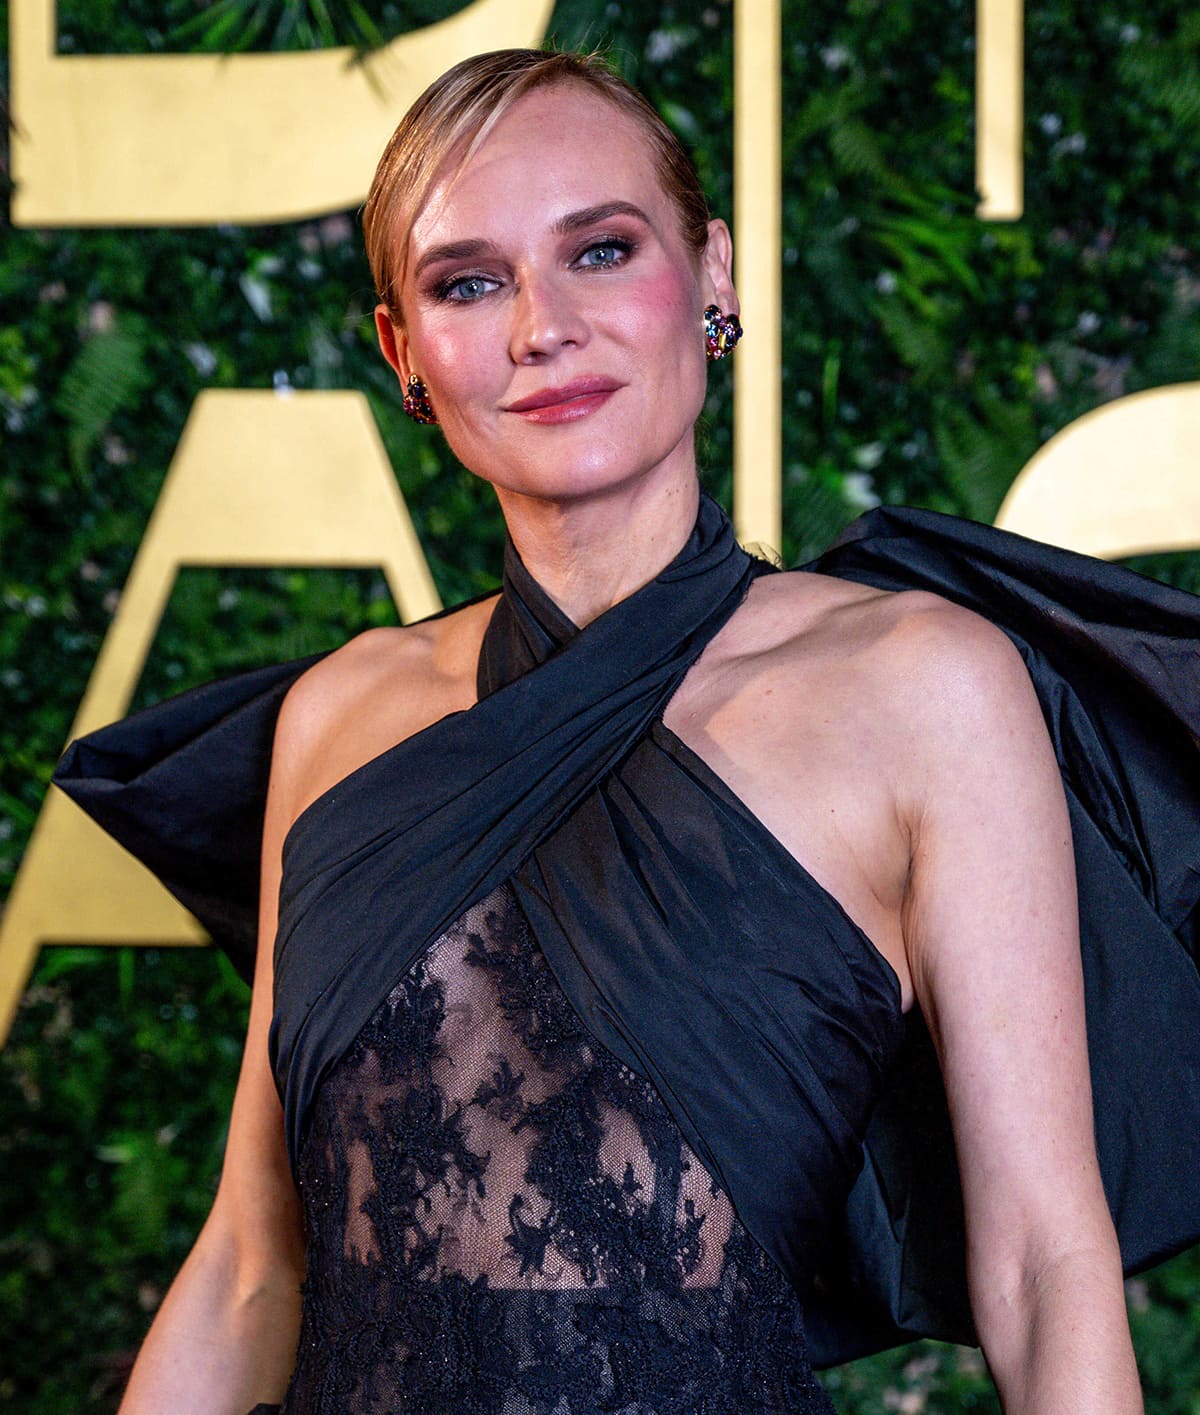 Diane Kruger styles her blonde hair in a neat side-parted updo and highlights her lovely features with smokey eyeshadow, rosy blush, and pink lipstick